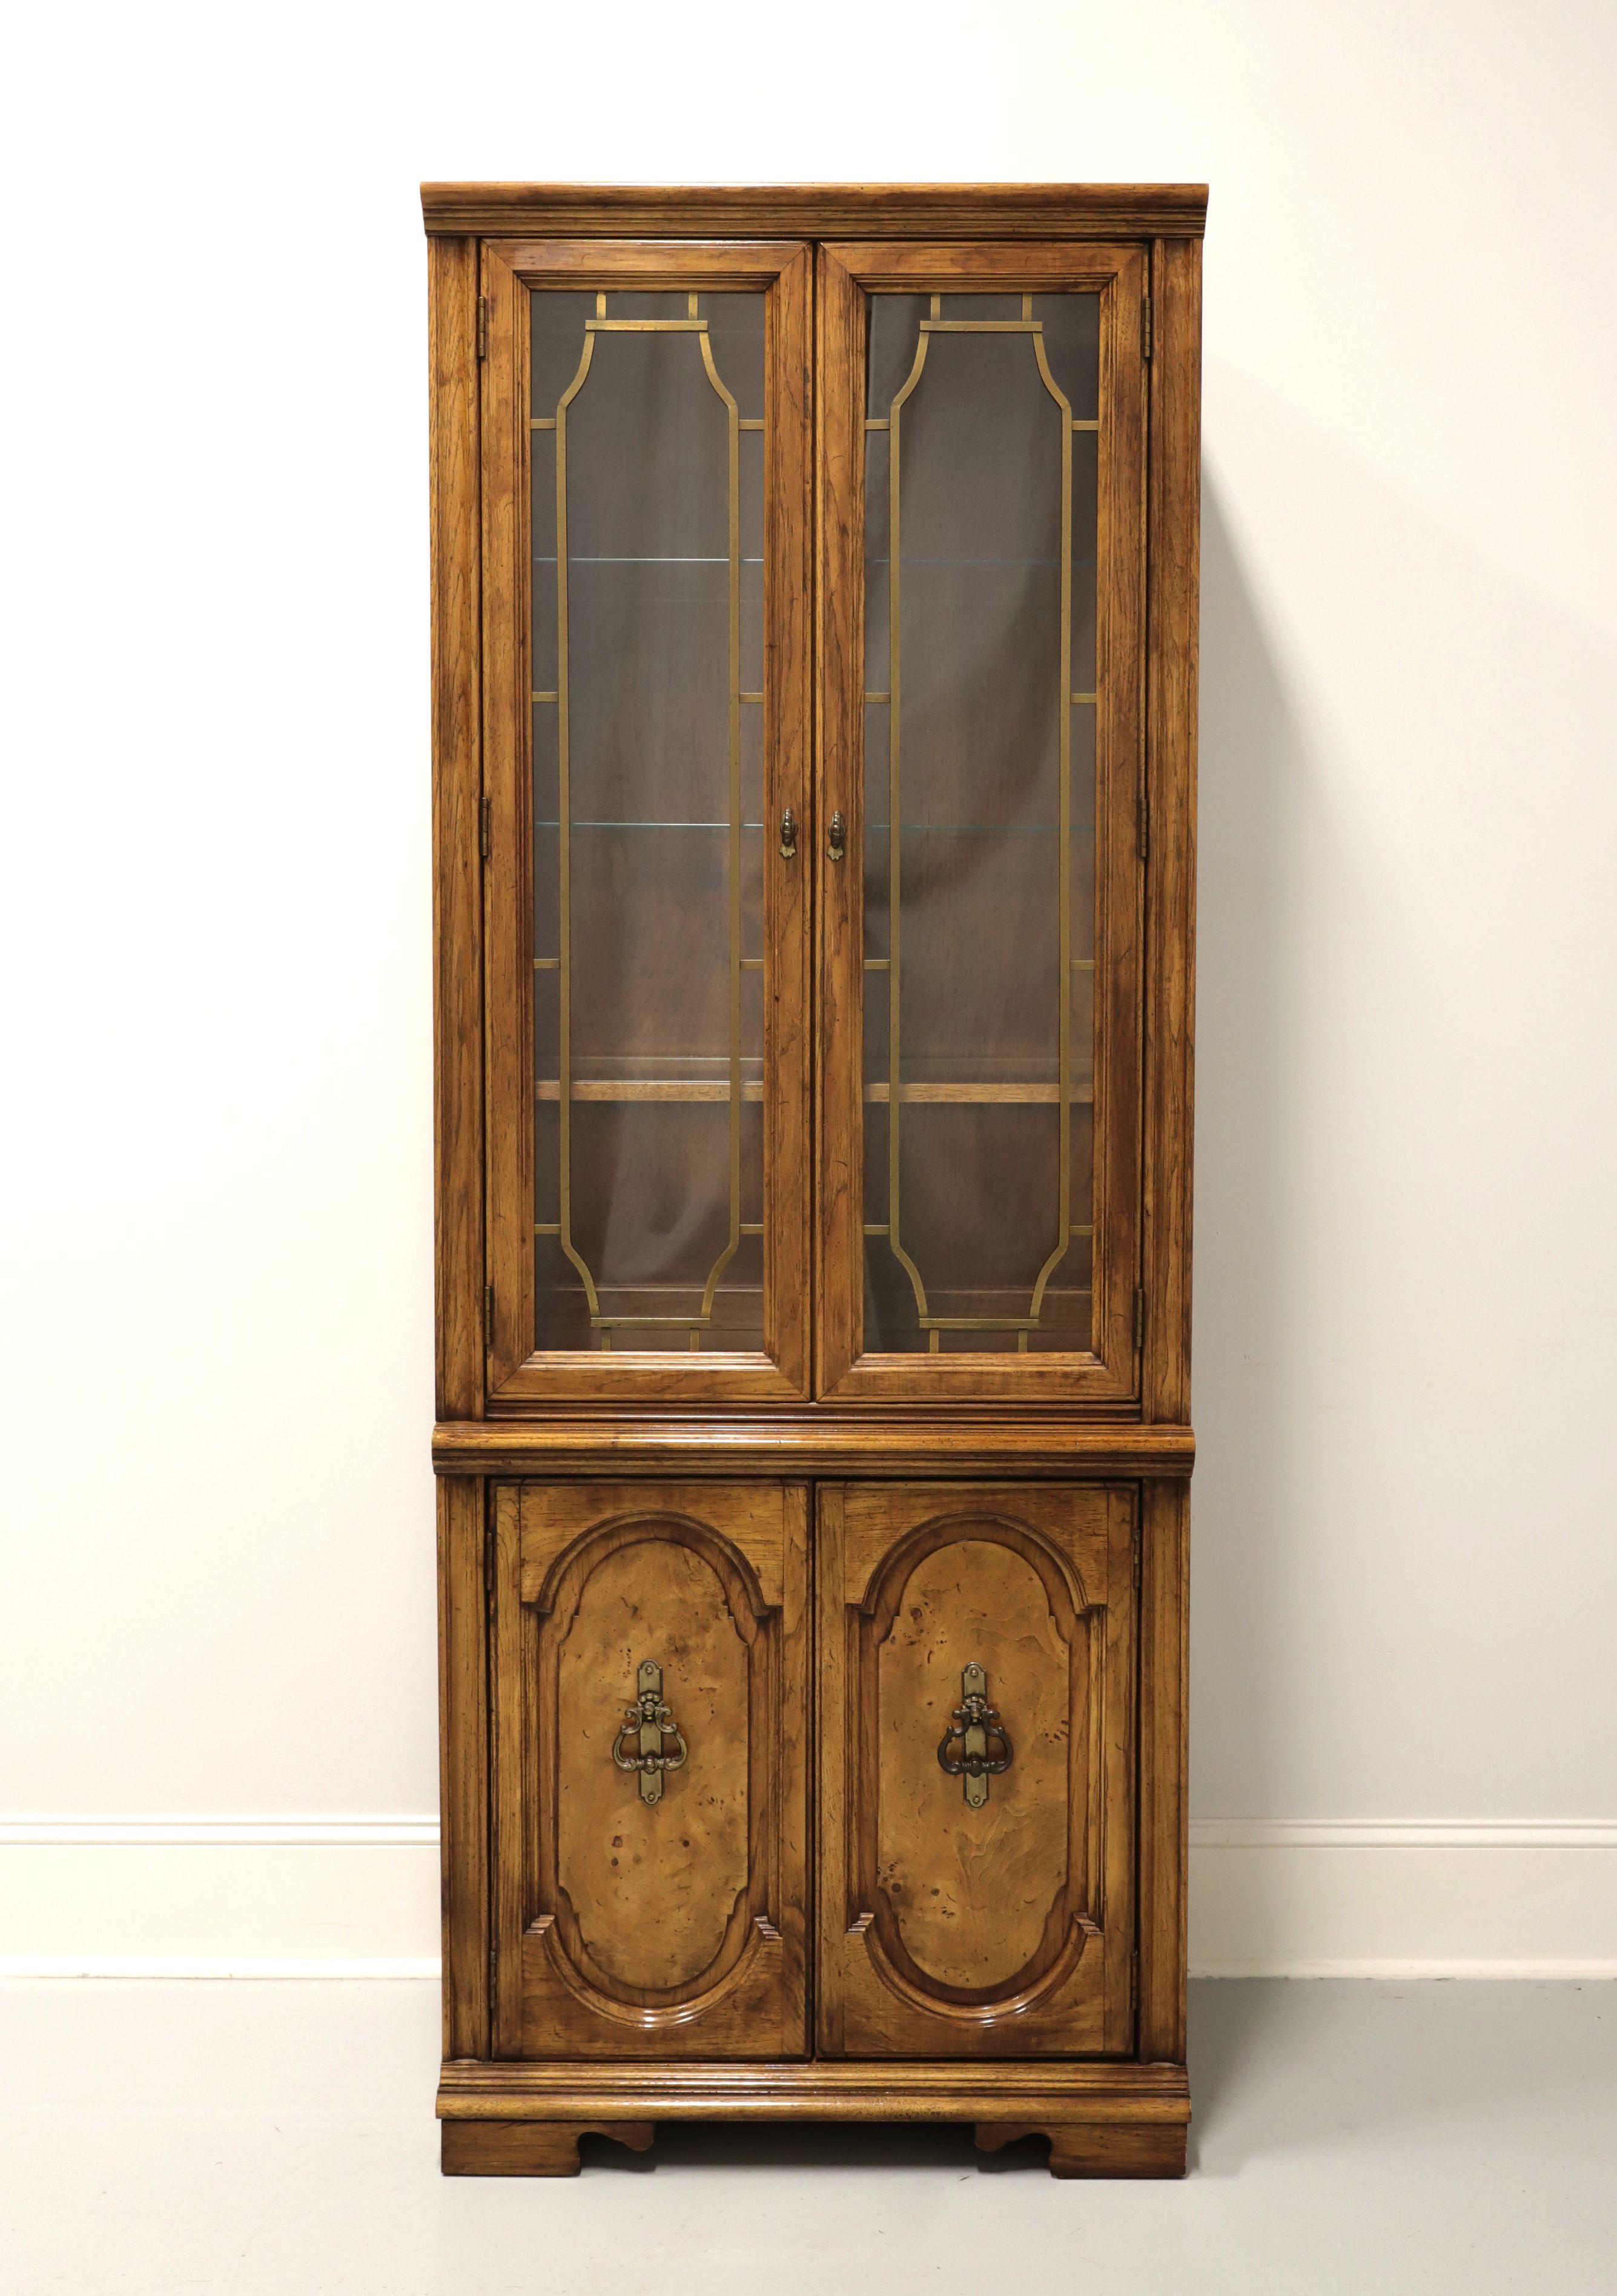 A Mediterranean style curio / display cabinet, unbranded, similar quality to Bassett or Henredon. Burl pecan with brass hardware. Upper cabinet with dual glass doors with brass fretwork, lighted interior, lower wood encased fixed plate grooved glass